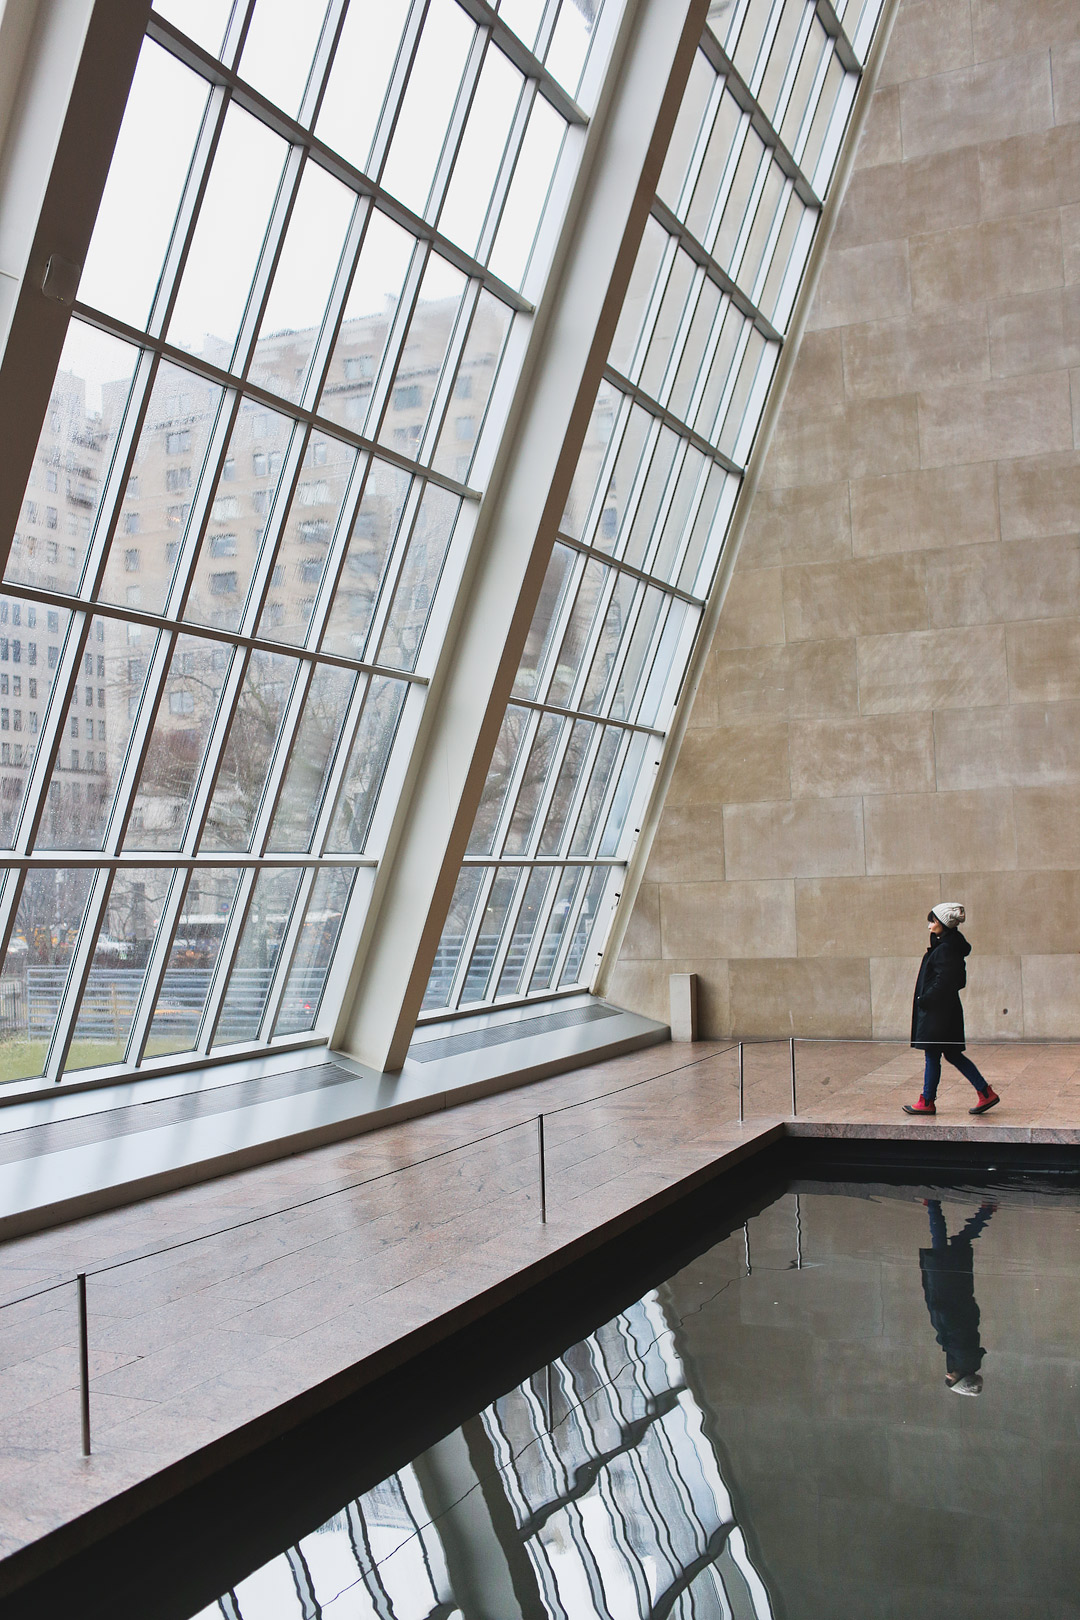 Temple of Dendur at the Met in Central Park + 25 Amazing Photography Spots in NYC // Local Adventurer #photography #instagram #nyc #newyork #newyorkcity #ny #met #museum #reflection #usa #travel